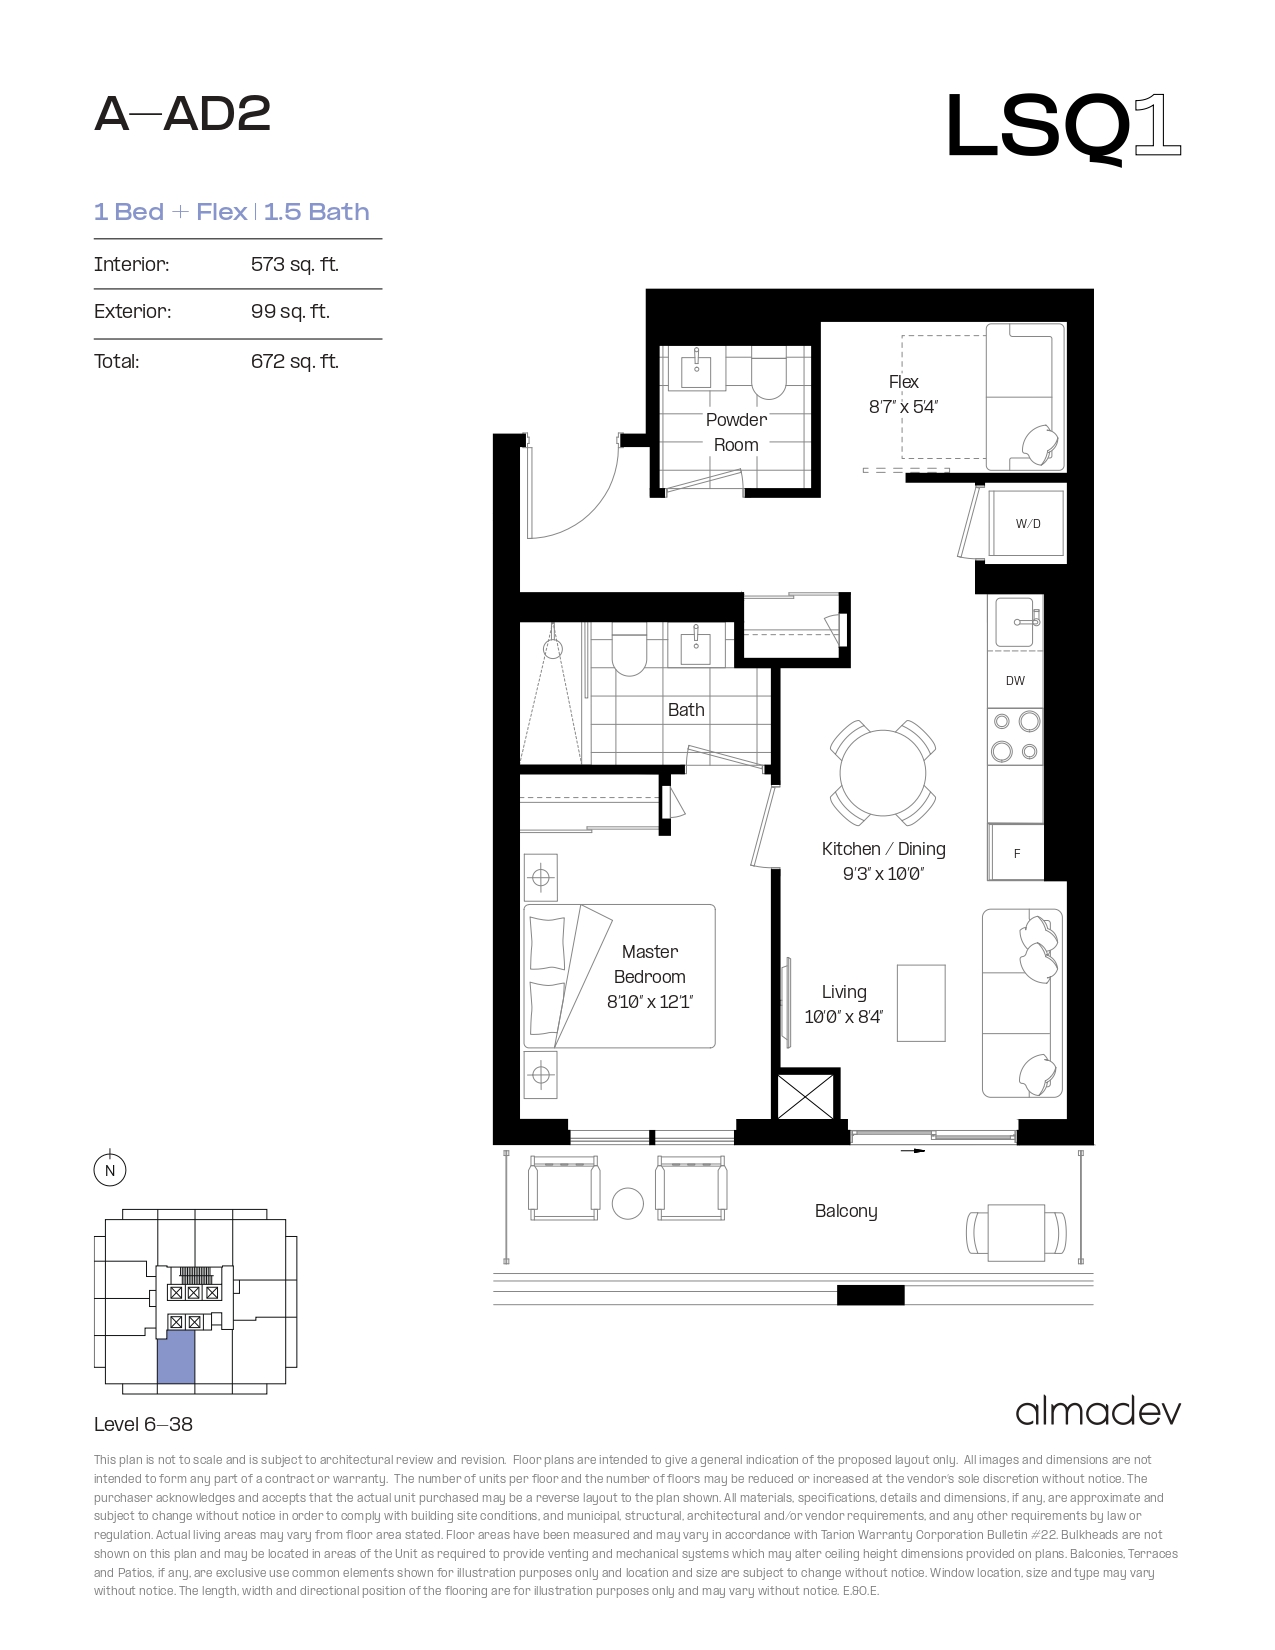 A-AD2 Floor Plan of LSQ Condos with undefined beds